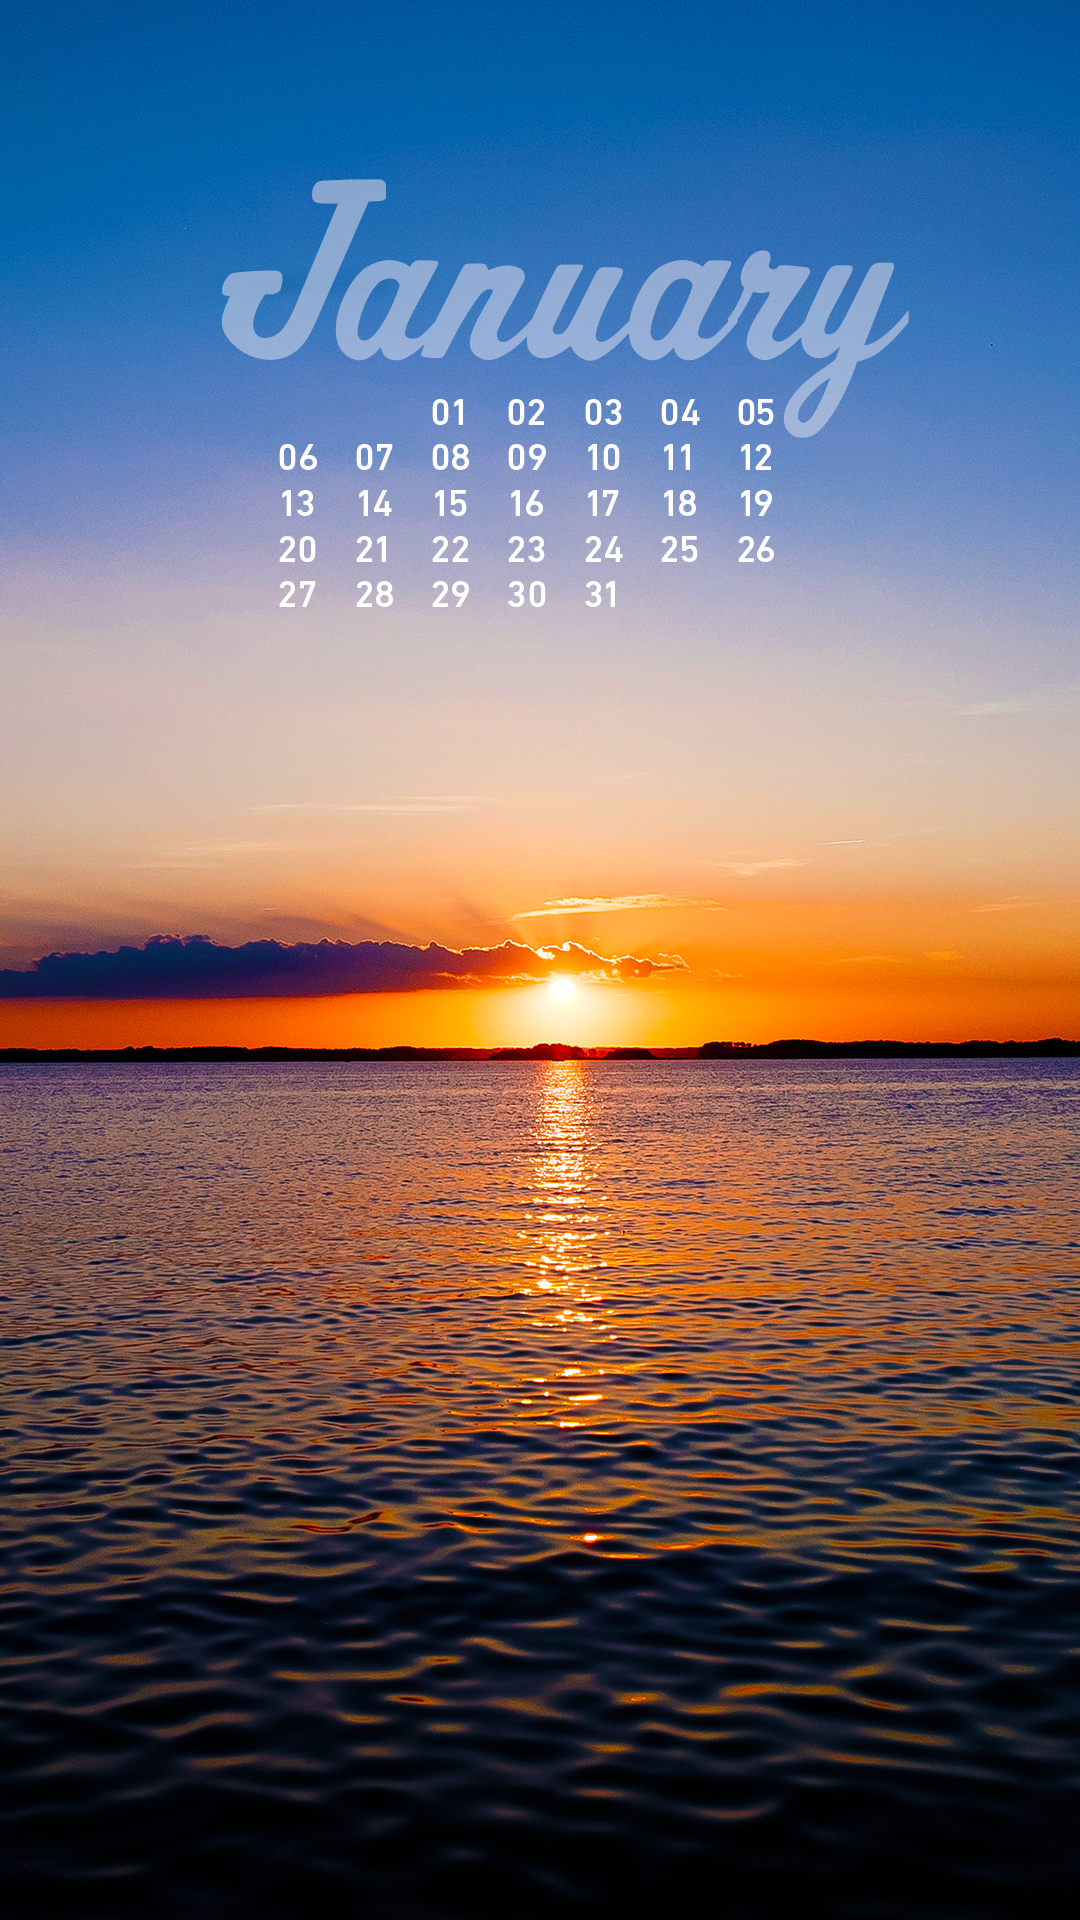 January Scenery Wallpapers on WallpaperDog